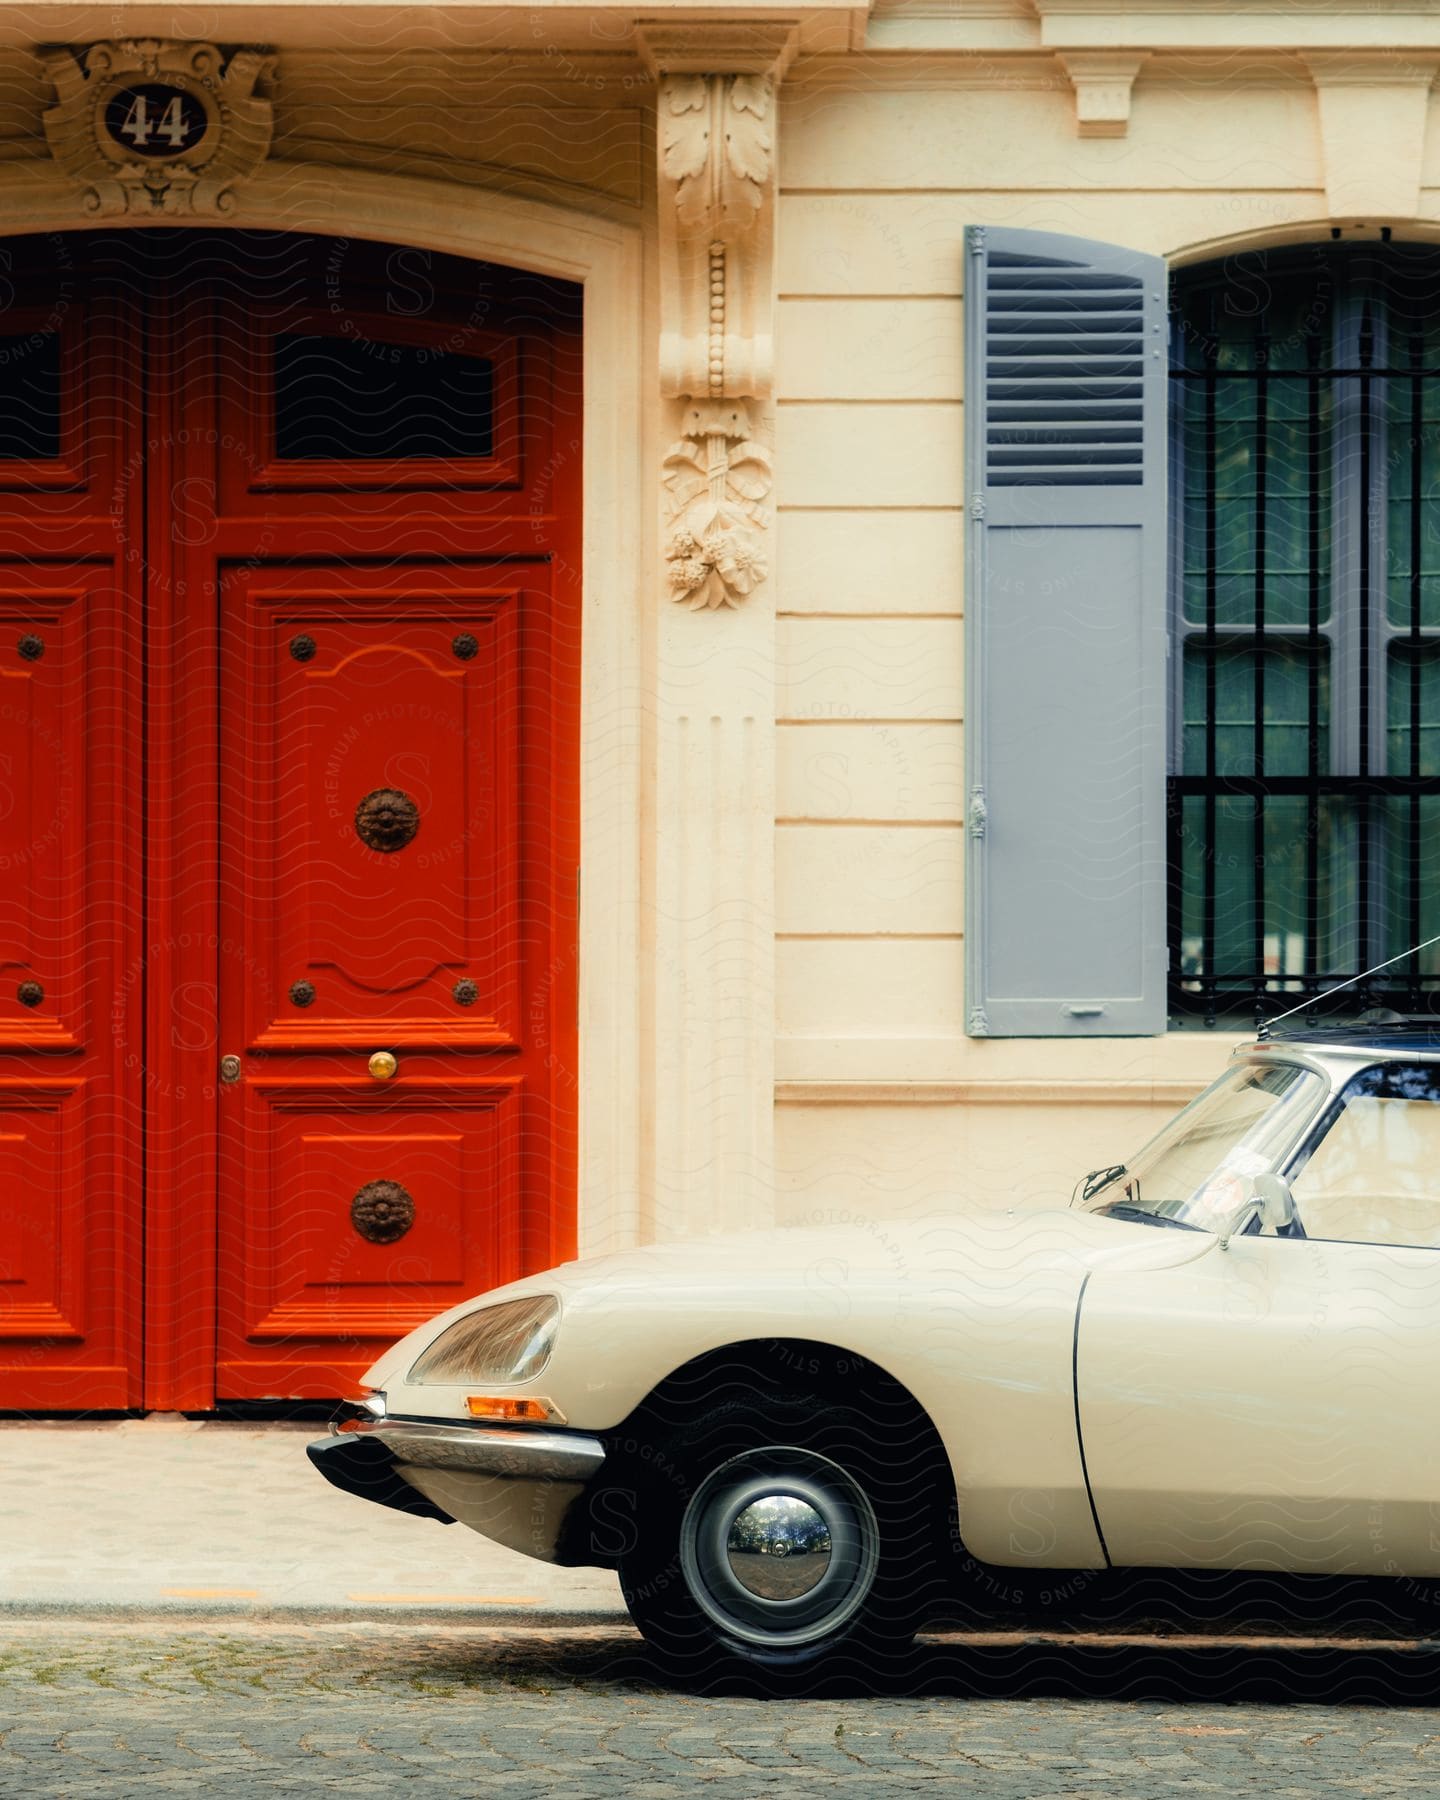 A small white car parked on the street in front of a building with a blue shutter window and red doors